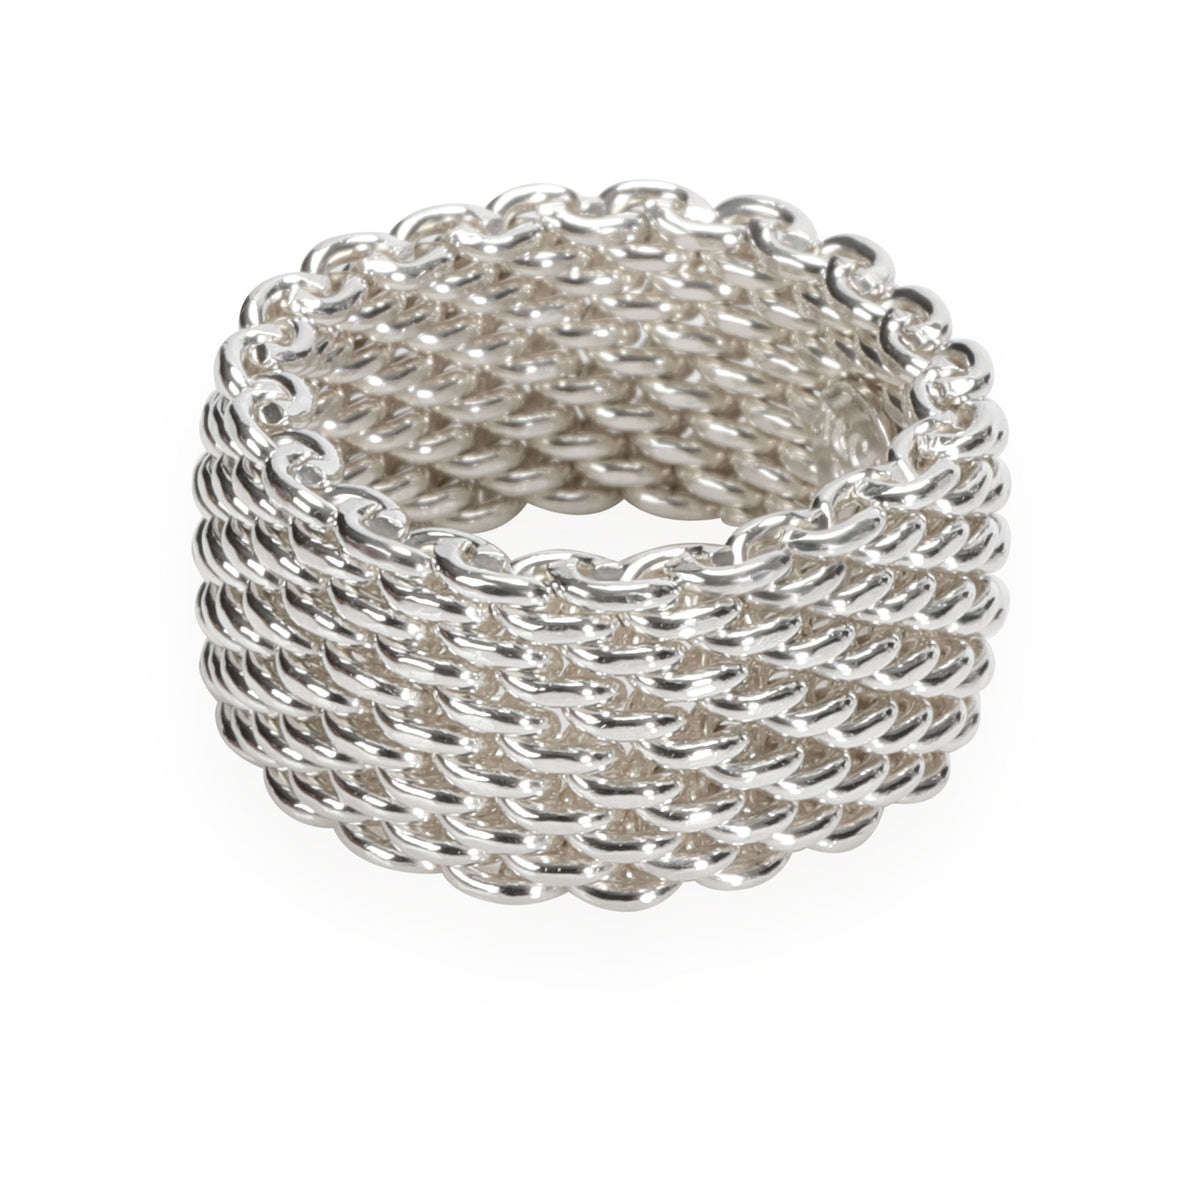 Tiffany Gold Mesh Ring - 9 For Sale on 1stDibs | tiffany mesh ring gold, tiffany  mesh ring discontinued, mesh gold ring